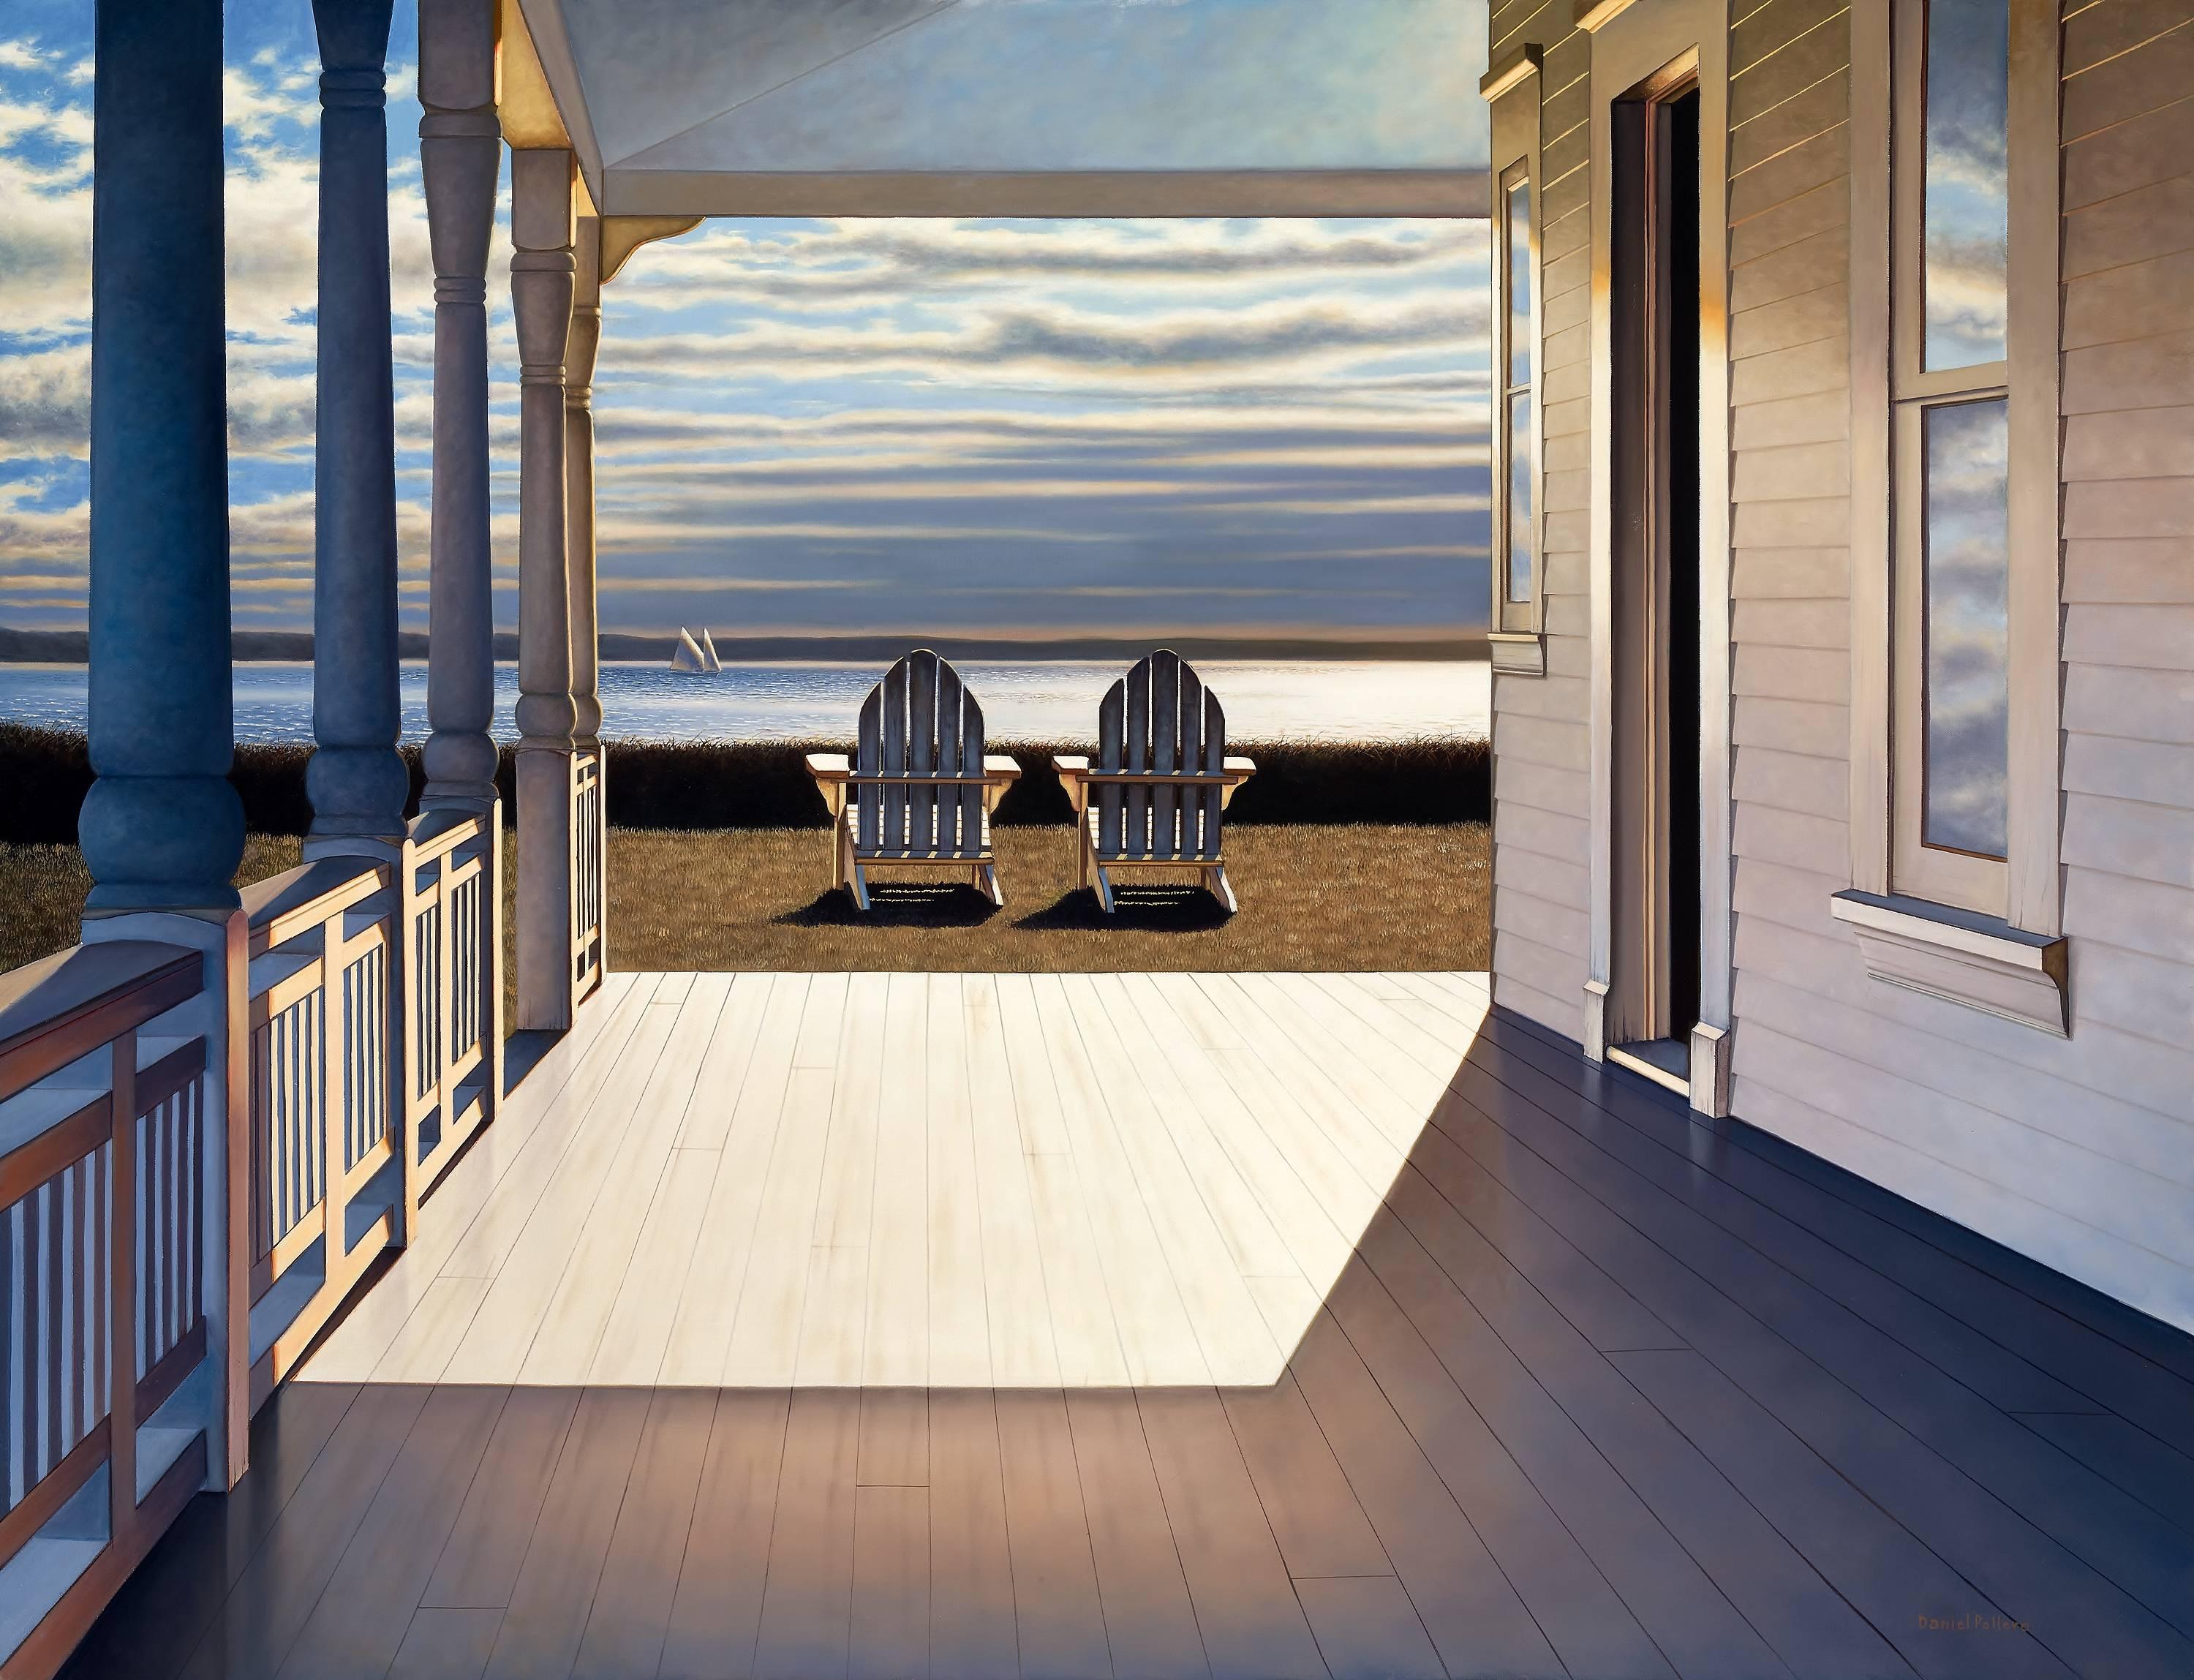 Daniel Pollera Landscape Painting - 'Passing Time', Large Contemporary Realist Ocean Marine Oil Painting